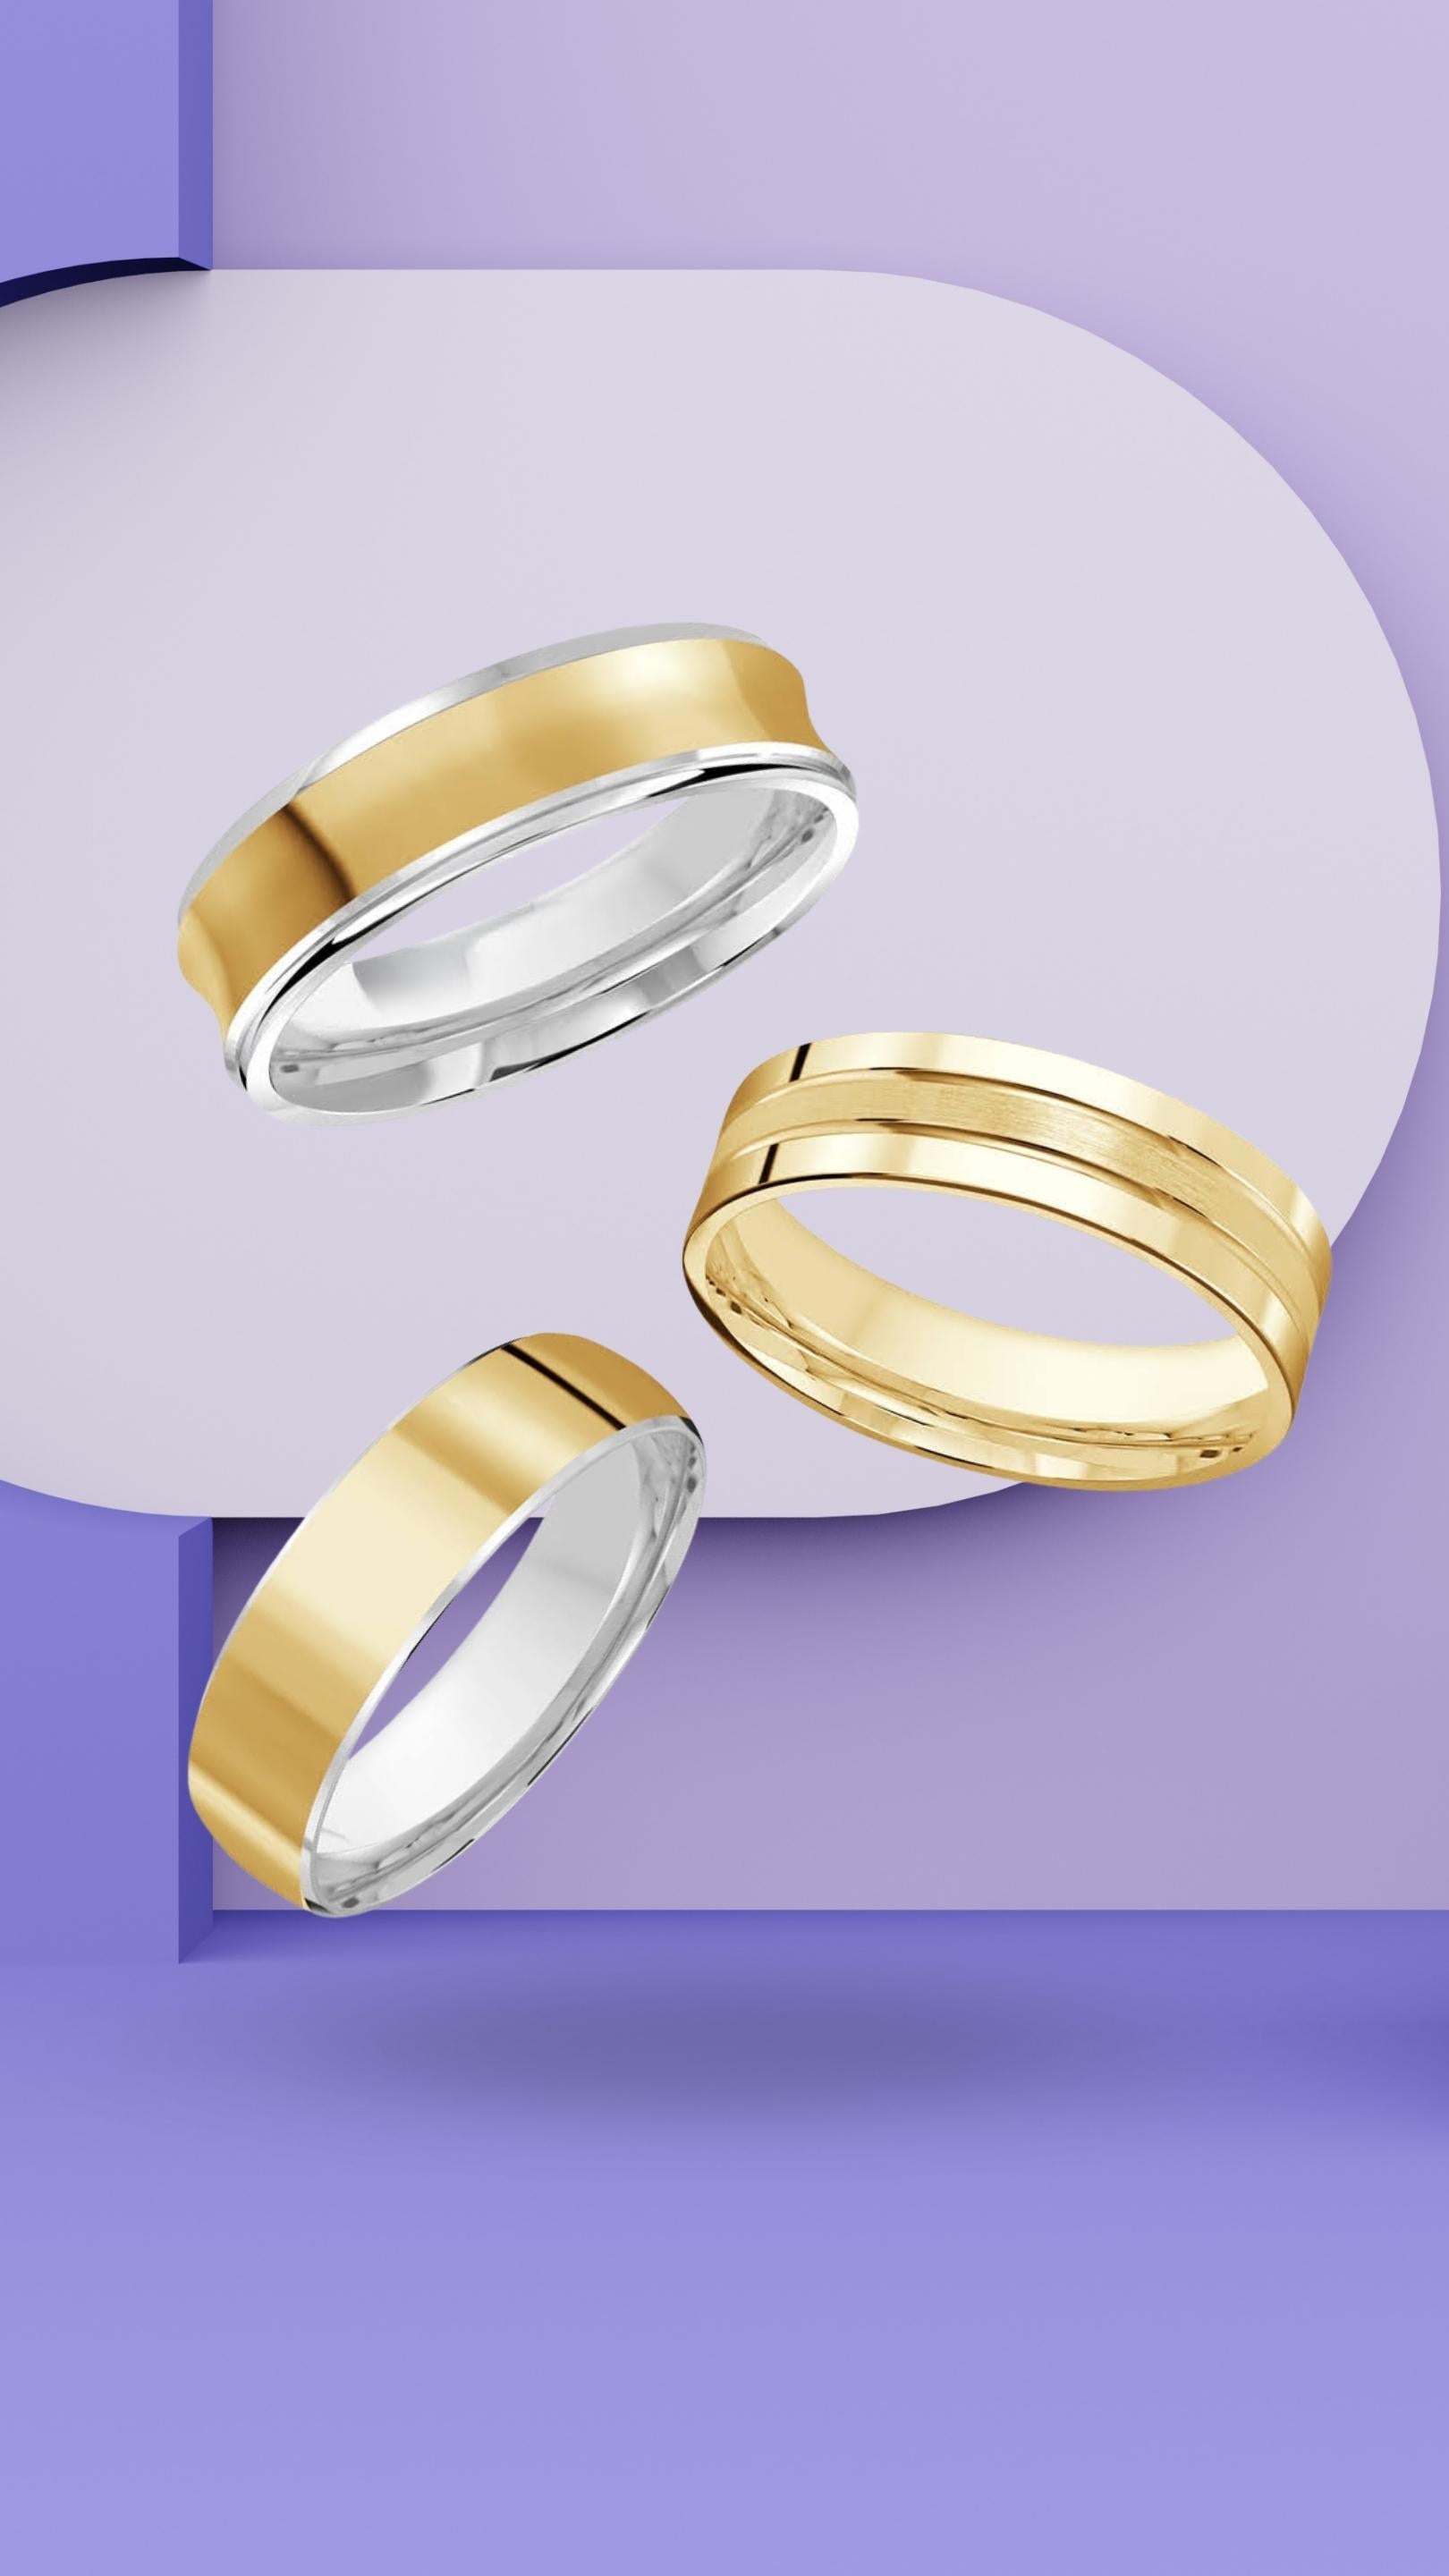 3 Gold Bands on Purple Background